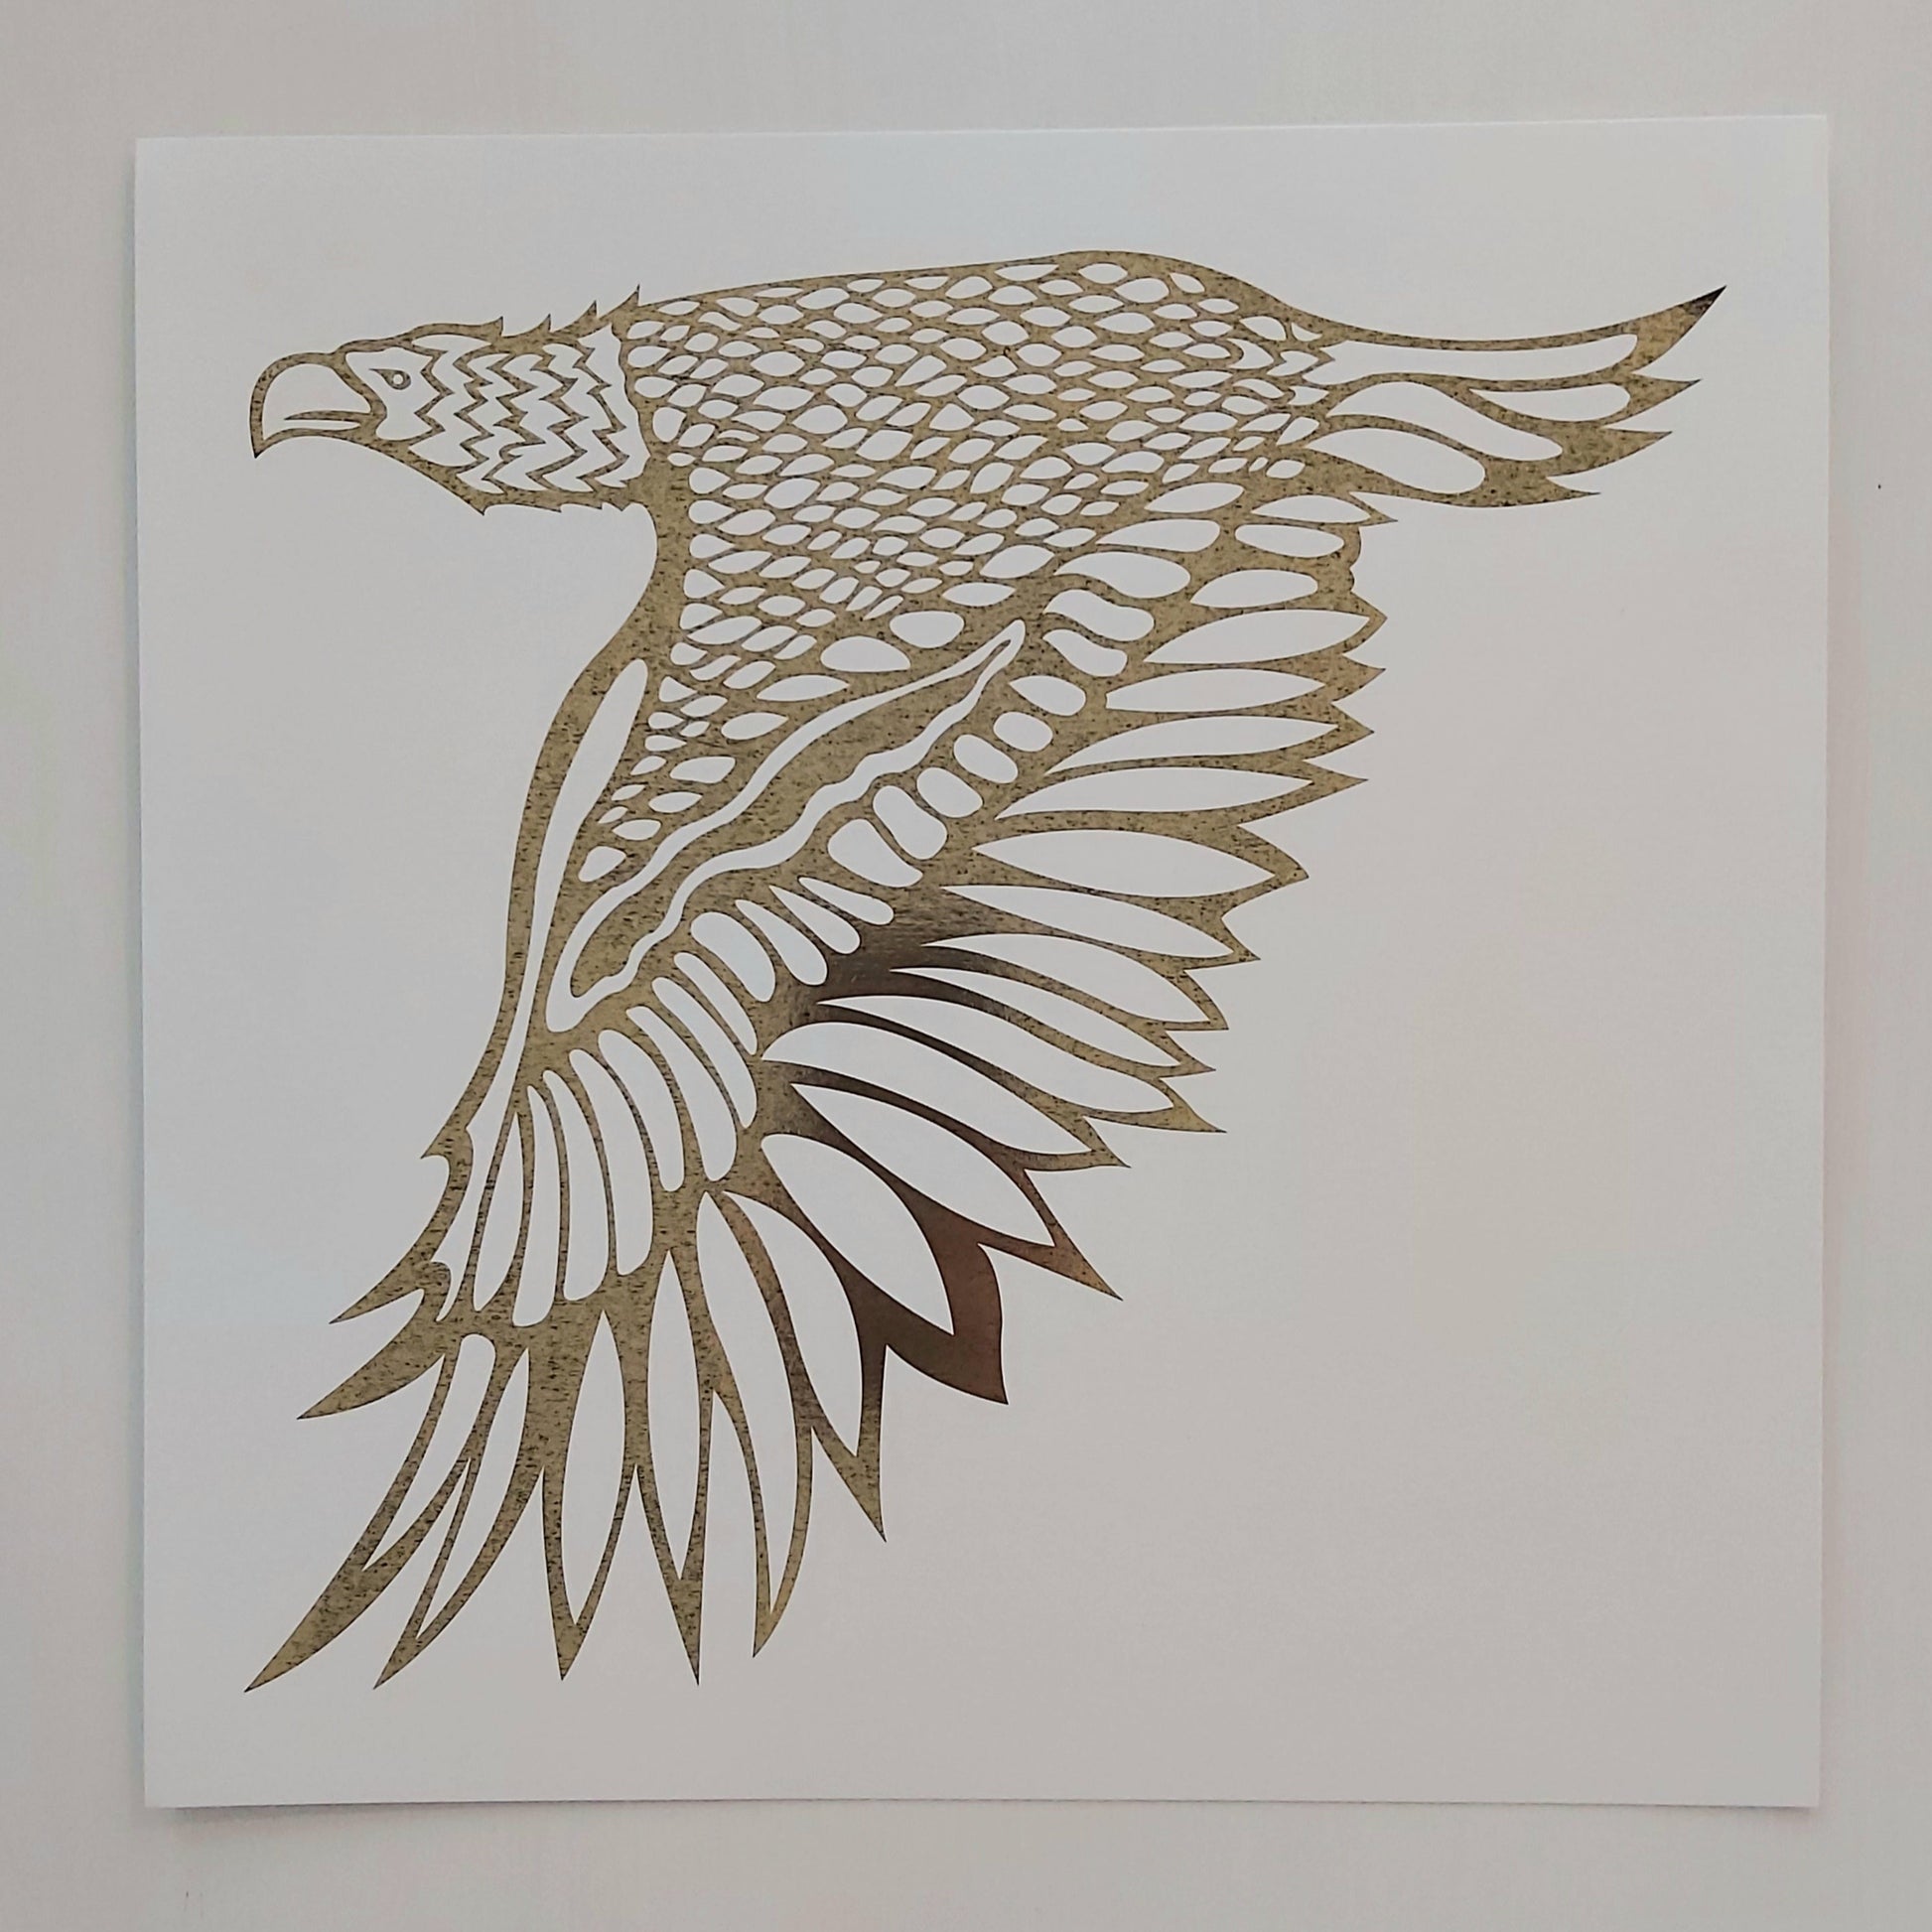 Print of Patrick Hunter's painting of an eagle in flight in gold leaf on white, woodland art style.